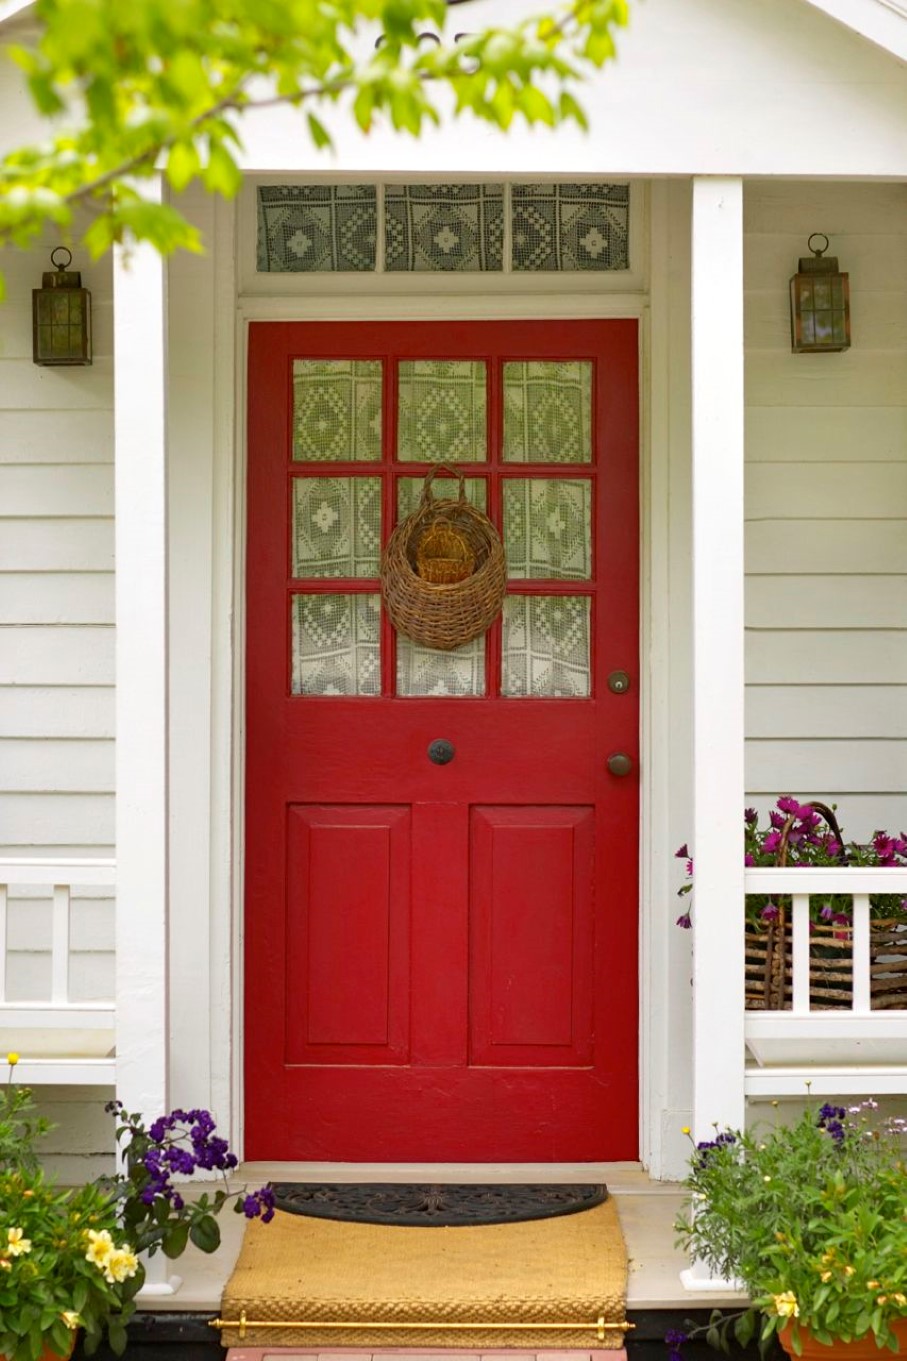 White Porch Banister Country White Porch With Railing Banister Set Plus Lovely Red Front Door Color Between Wall Lanterns Decoration  Colorful Front Door Colors 